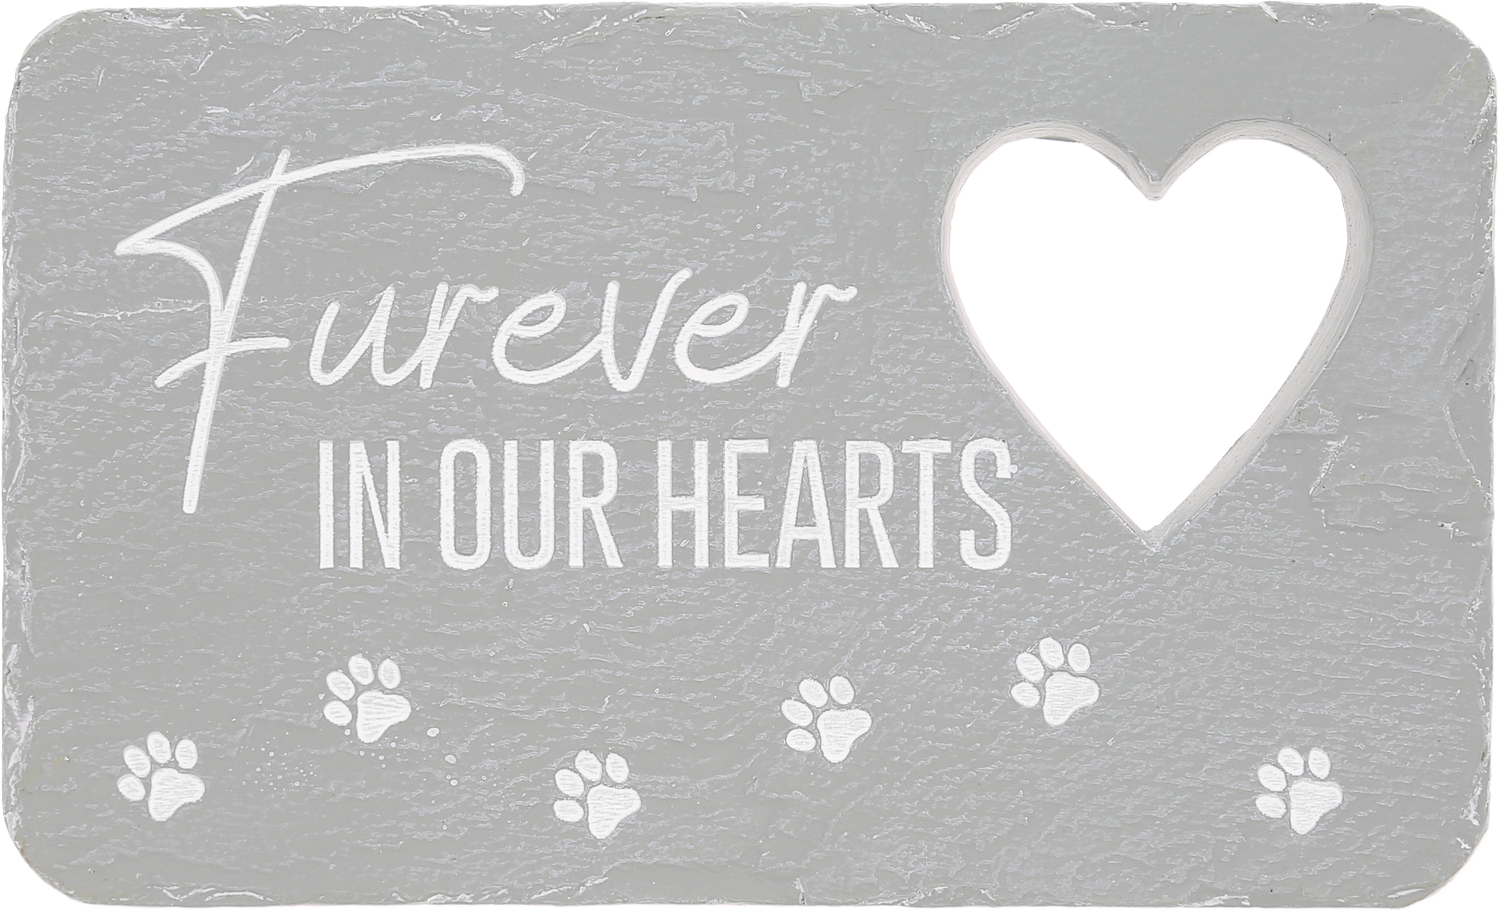 Furever In Our Hearts by Stones with Stories - Furever In Our Hearts - 7" x 4.25" Garden Stone